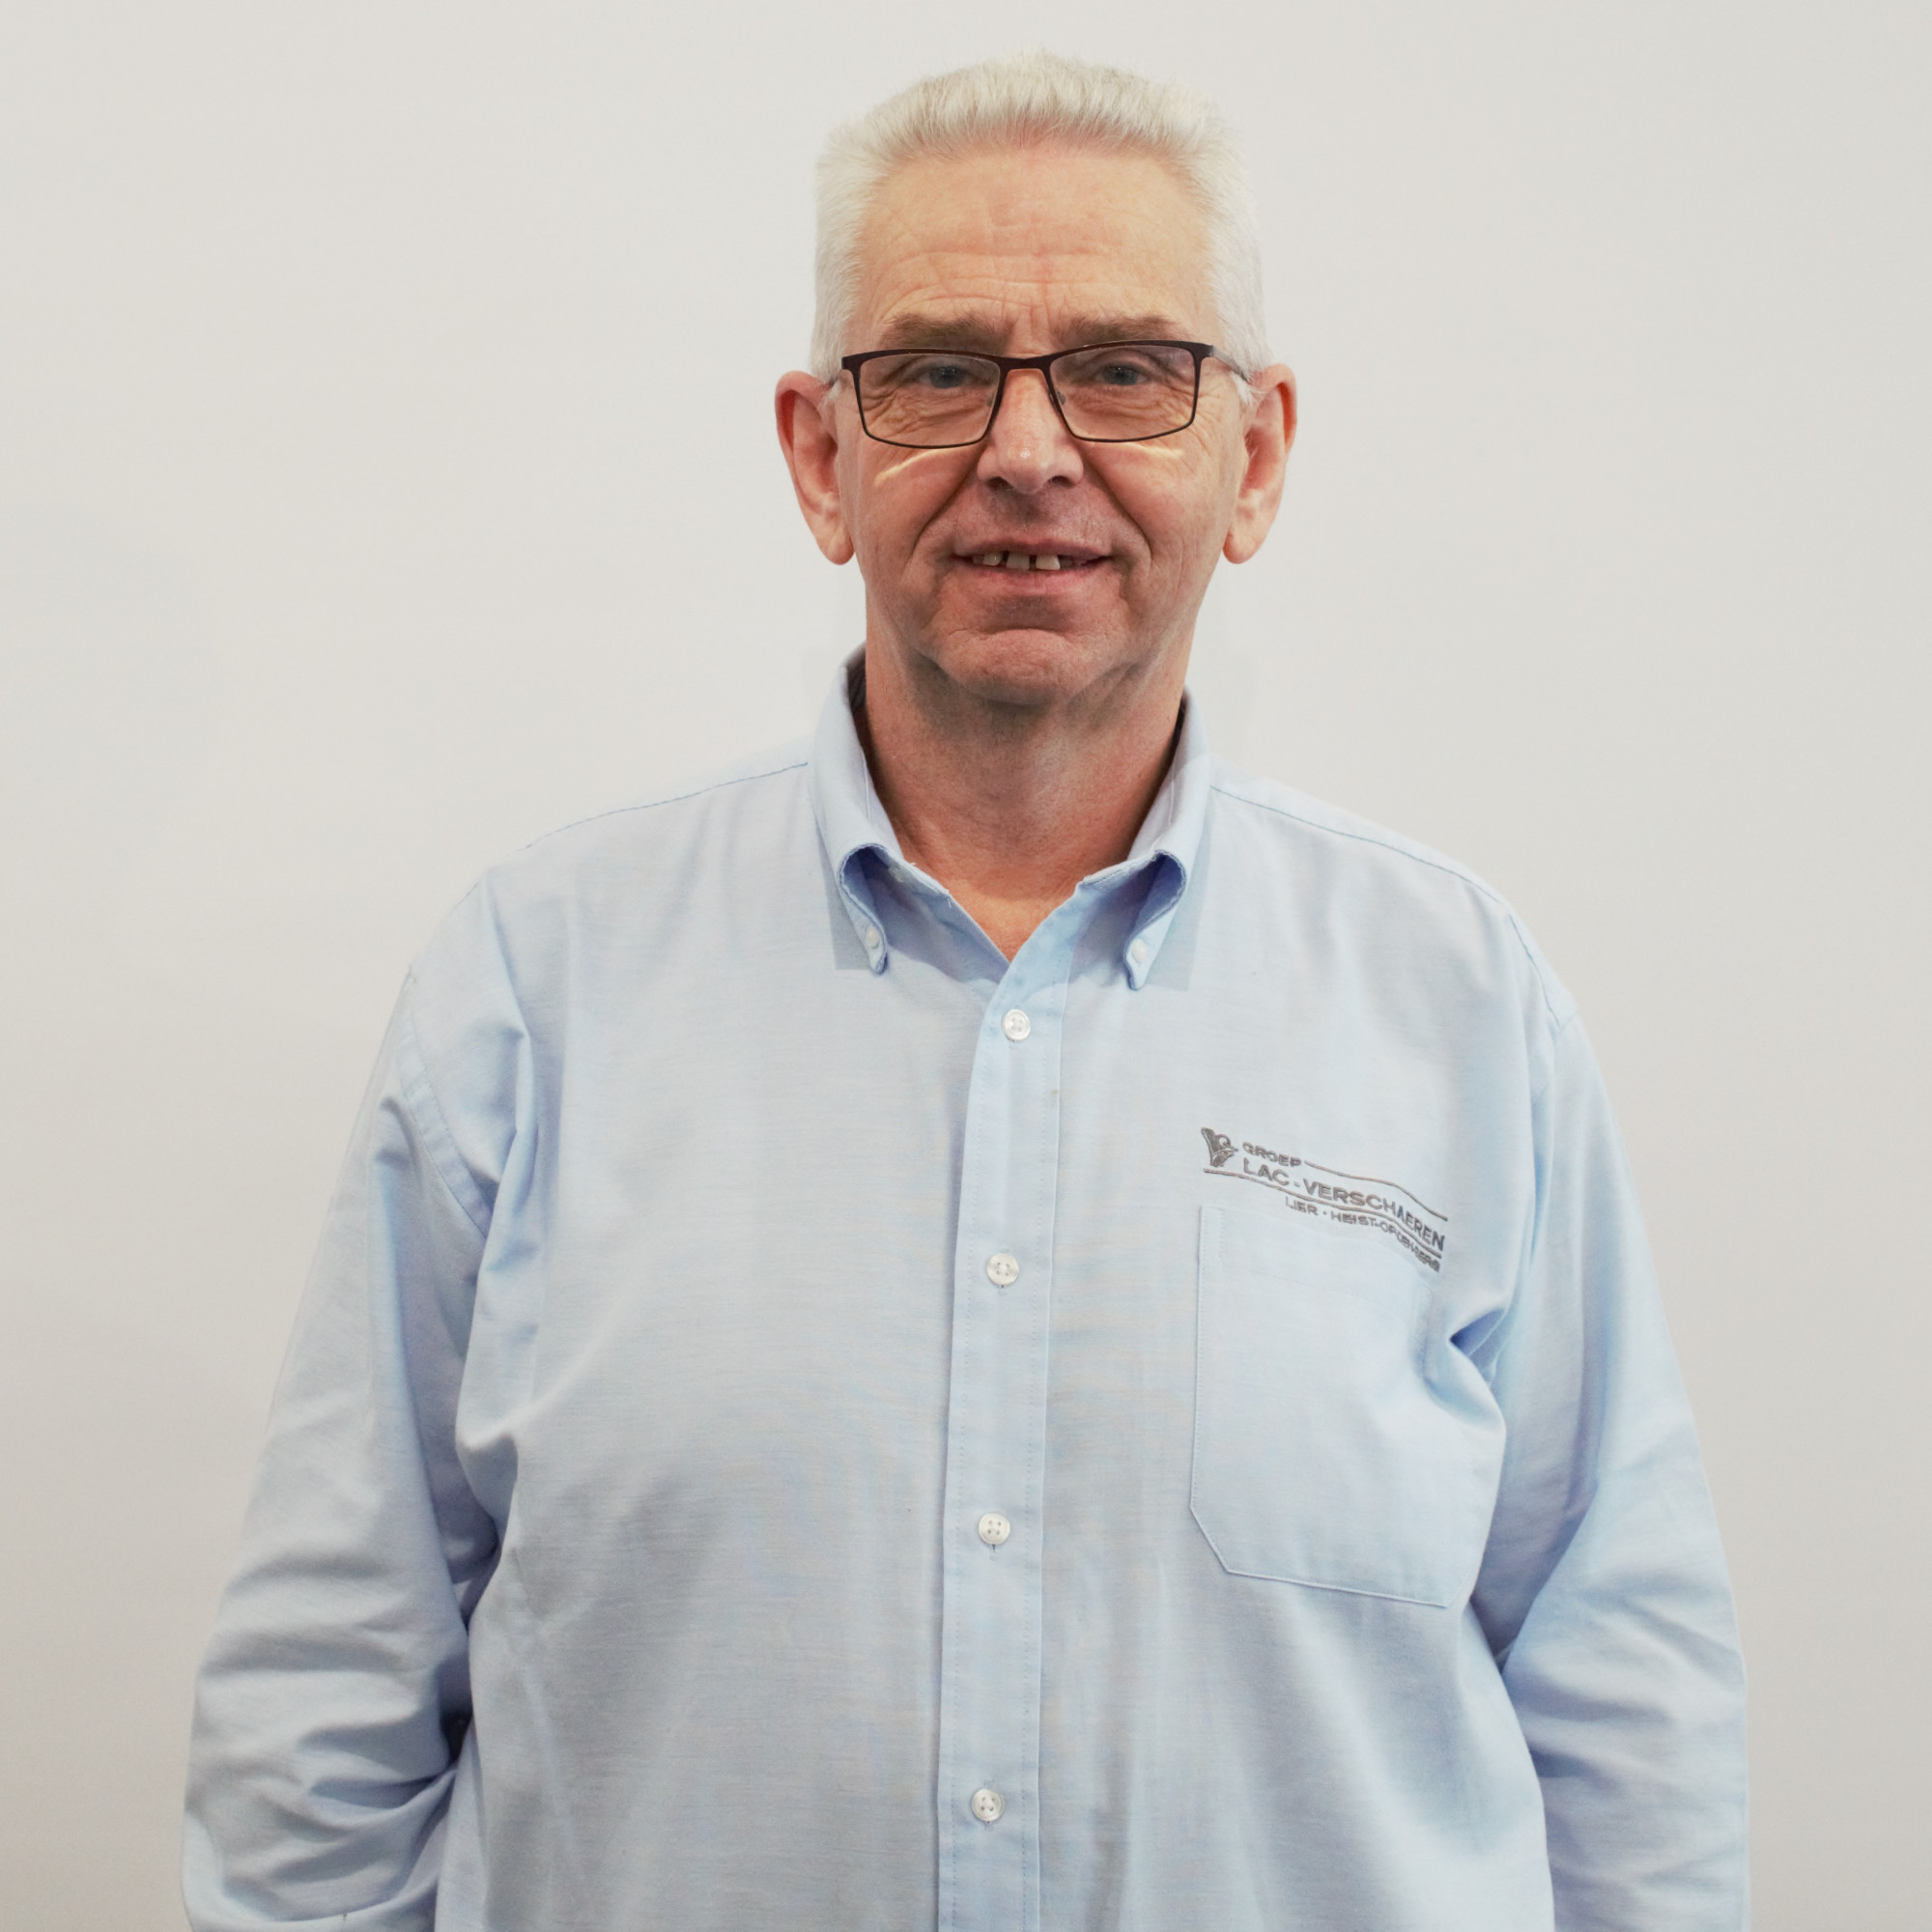 Aftersales Manager - Rudy Maes